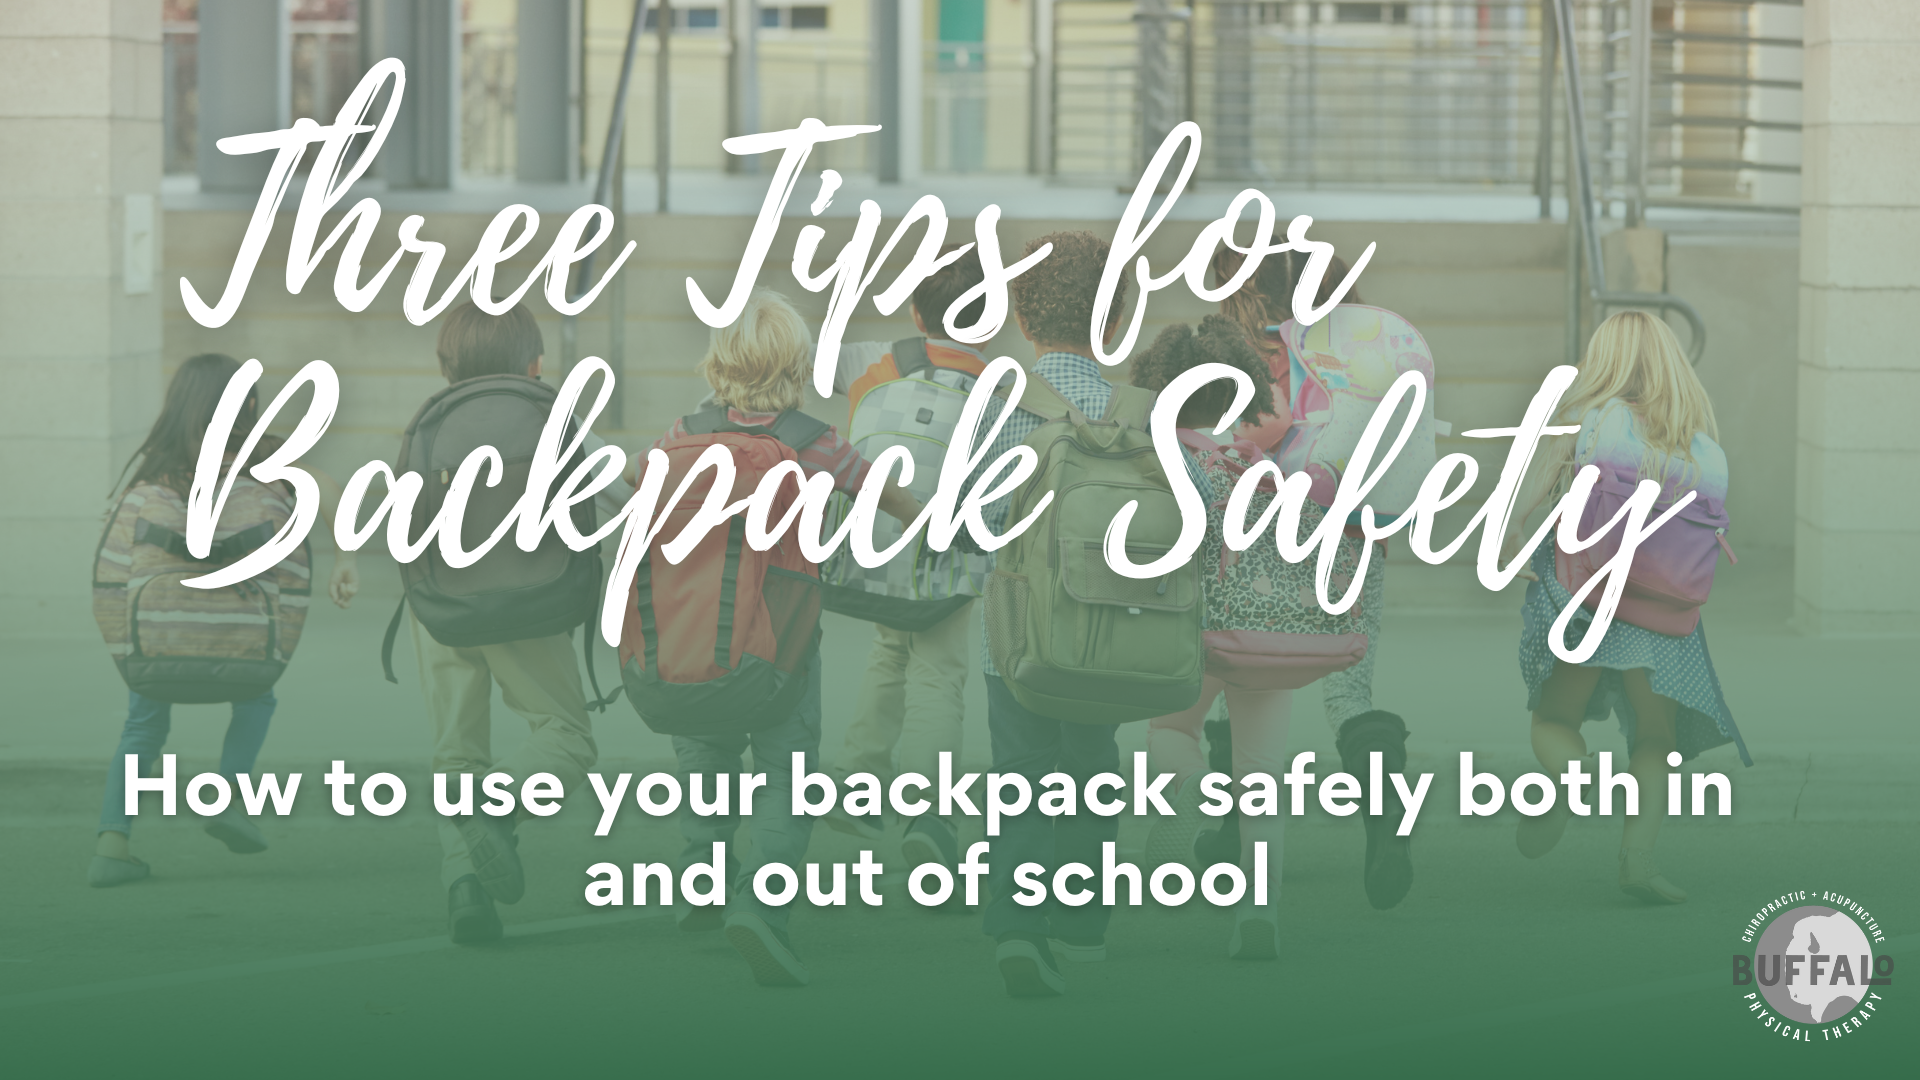 Back To School Backpack Safety Tips Buffalo Chiropractic Physical Therapy 